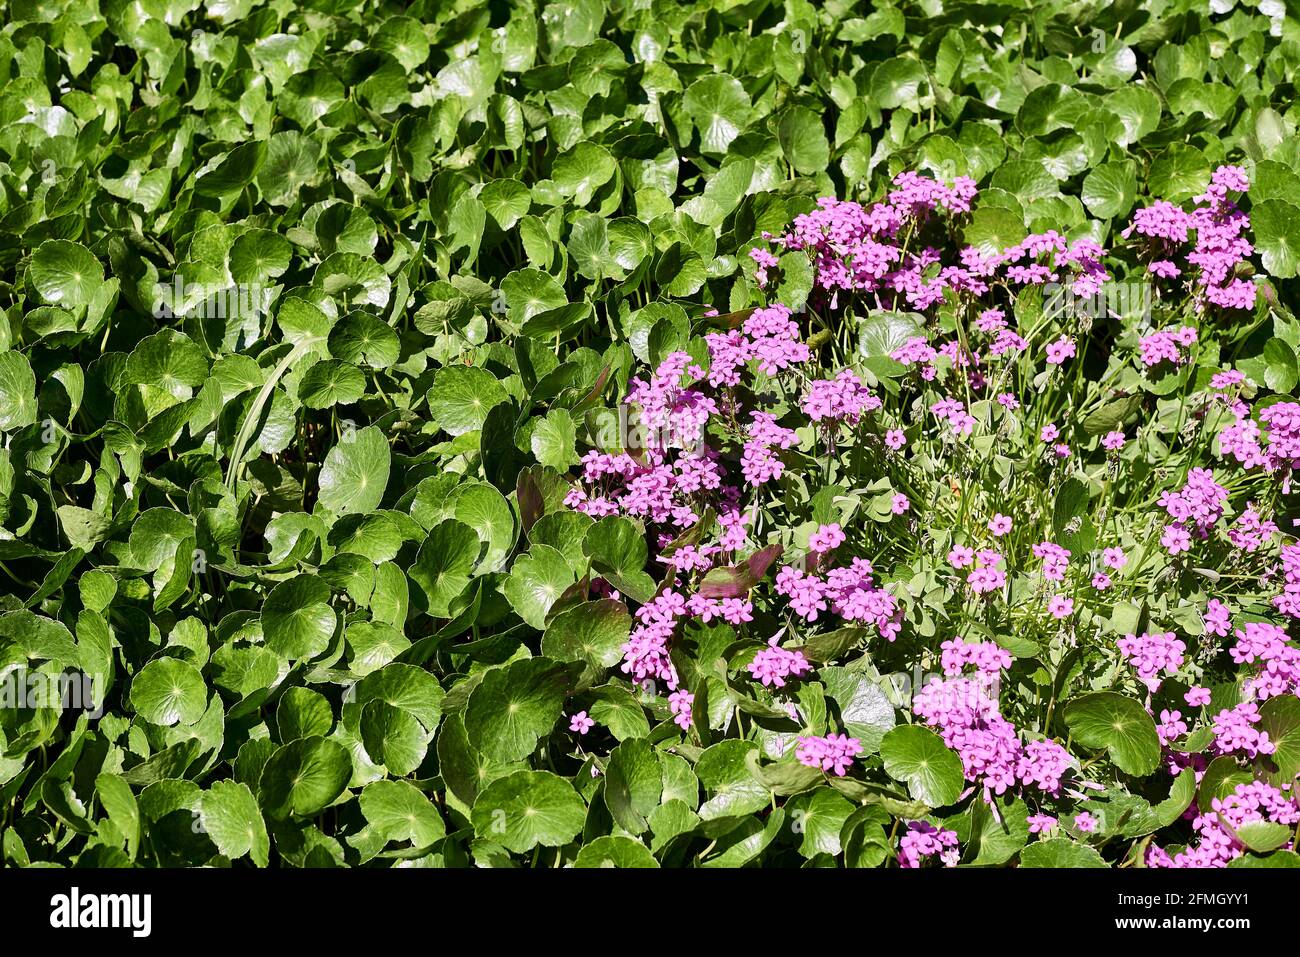 Group of pink acederilla flowers between the leaves .Oxalis articulata. Background out of focus, detail photograph. Stock Photo